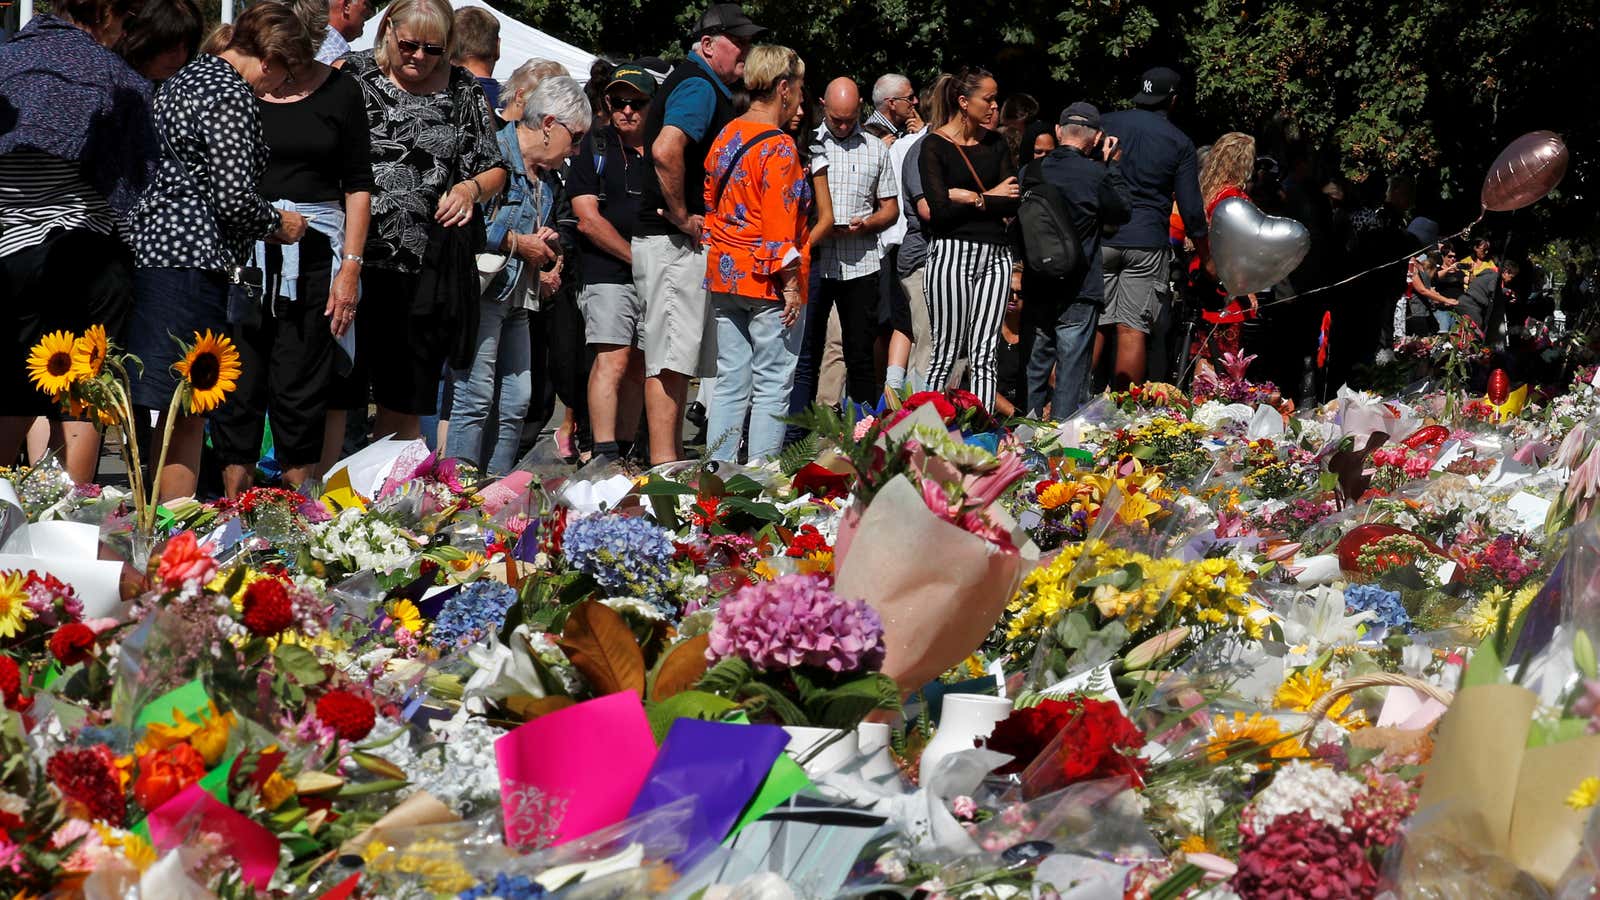 Mourners gather at the memorial site of the Christchurch shooting in New Zealand.